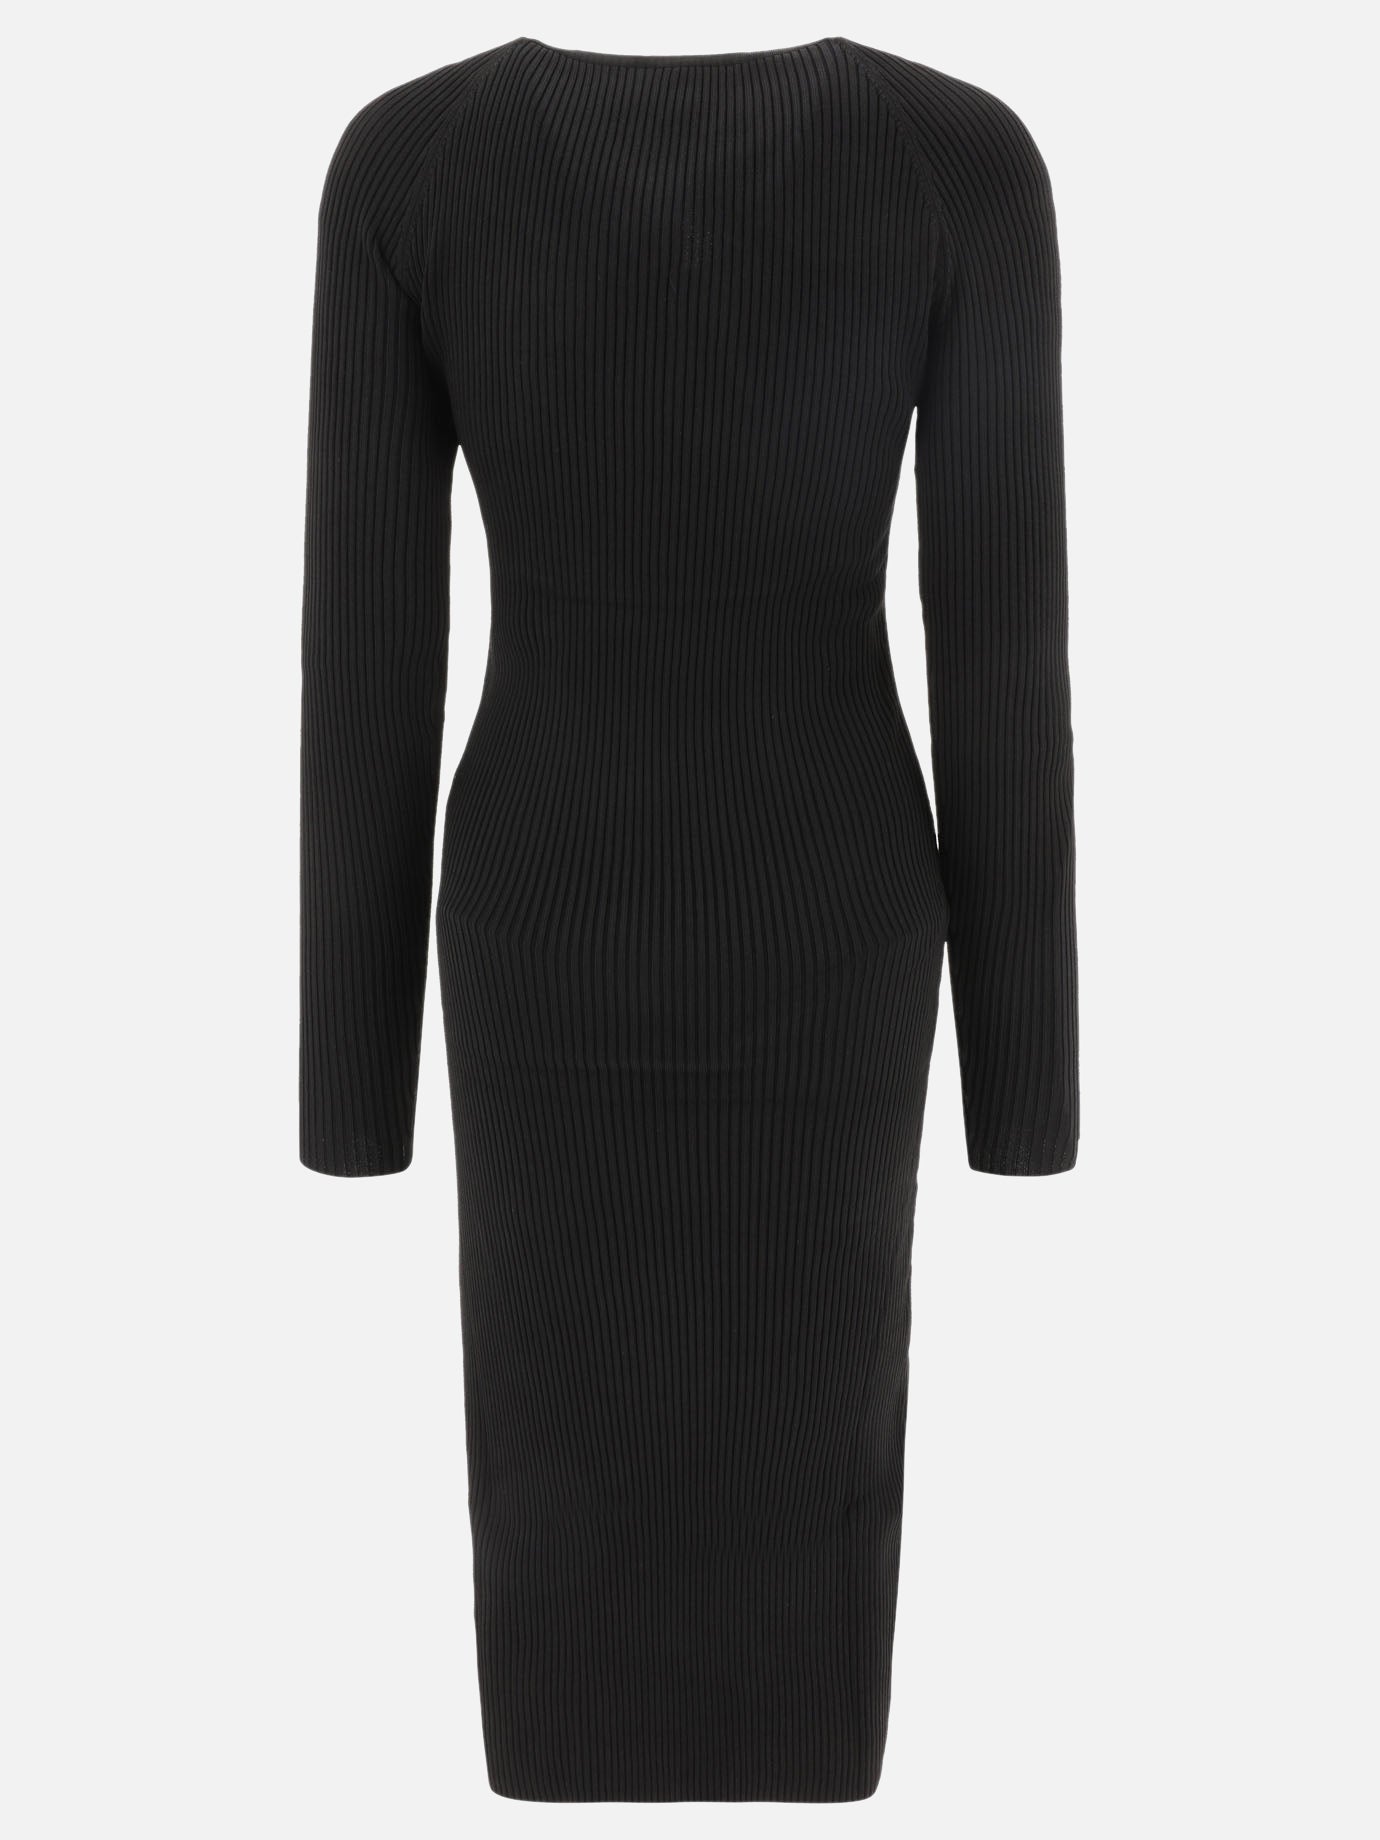 "Twisted" ribbed dress with cut-out